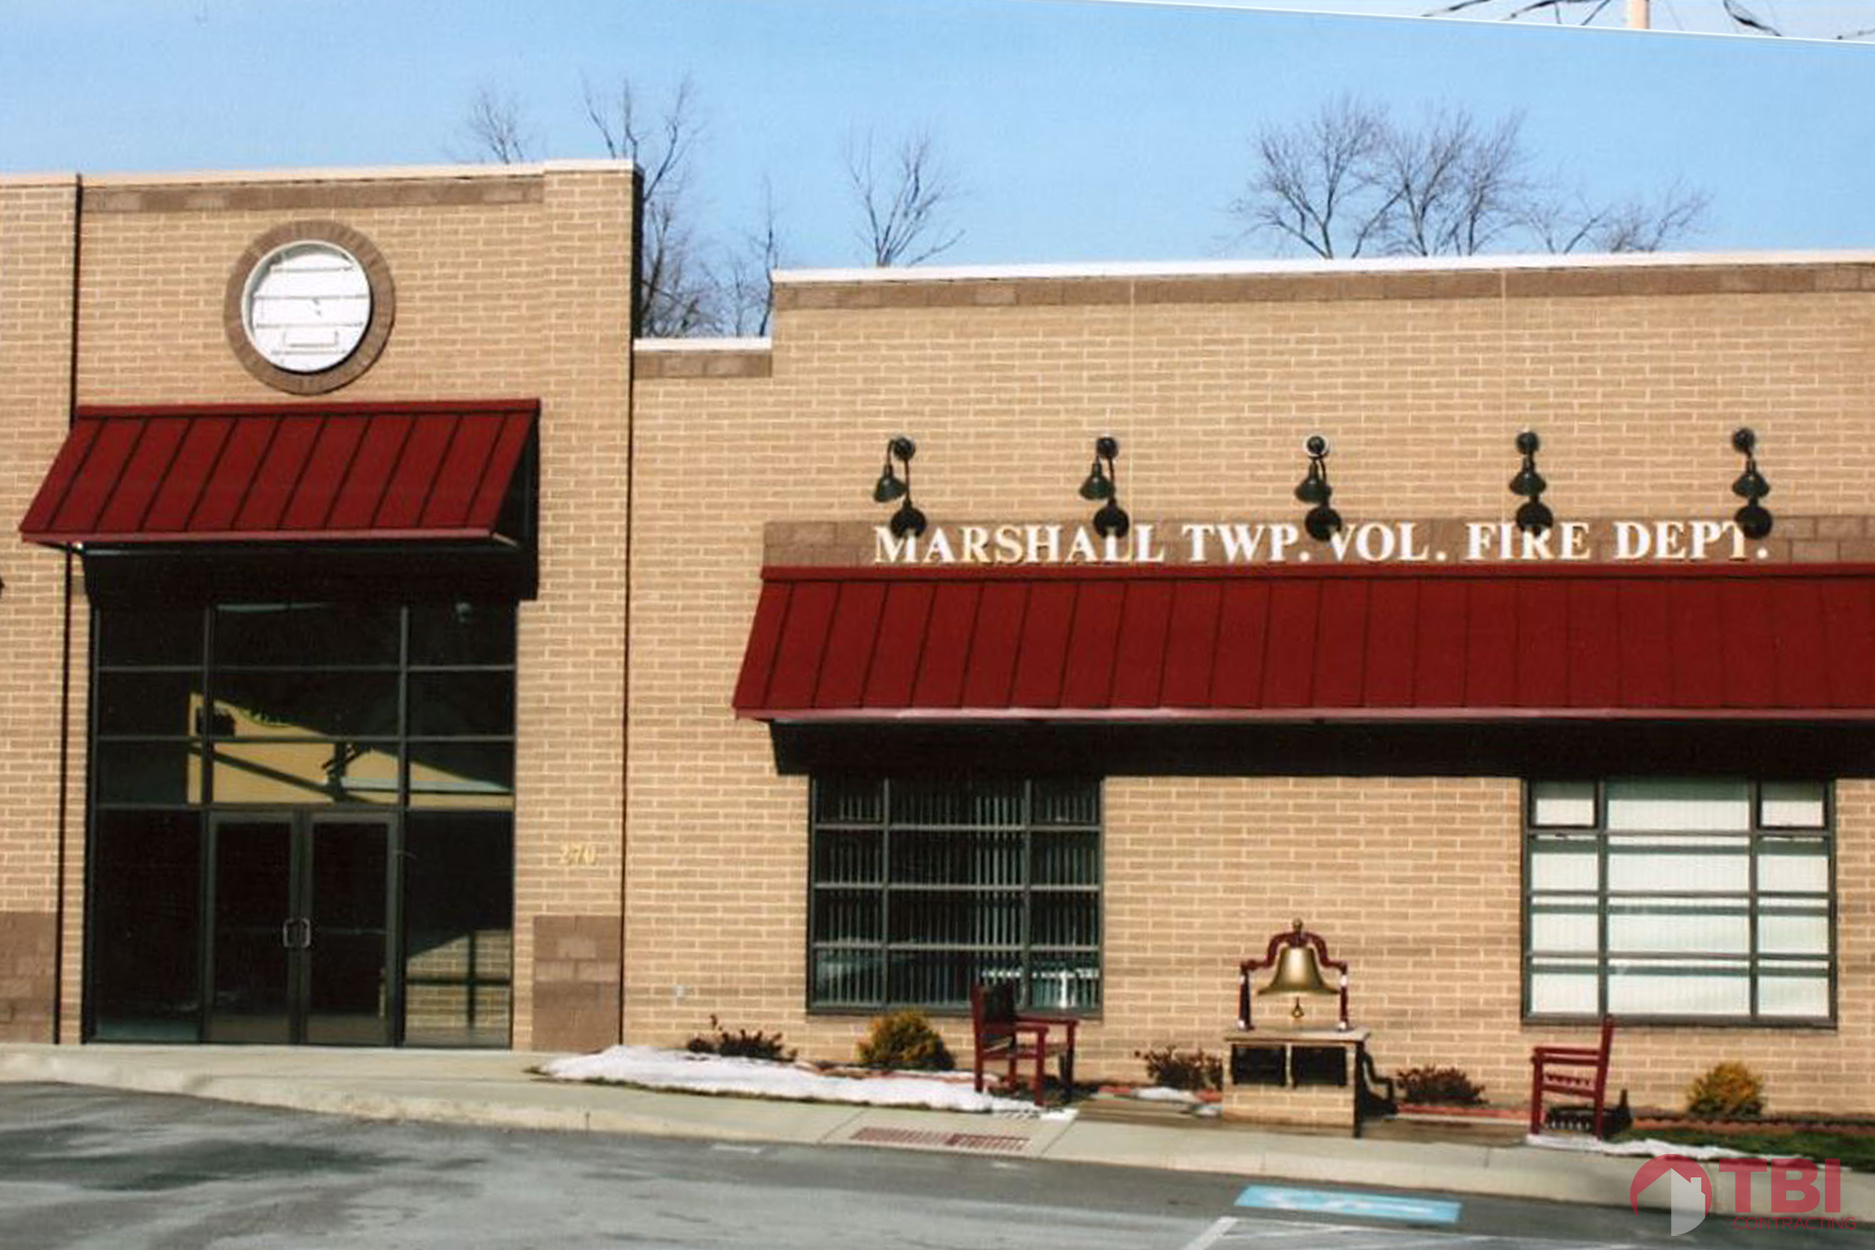 https://tbicontracting.com/wp-content/uploads/2015/04/marshall-twp-fire-dept-1.jpg